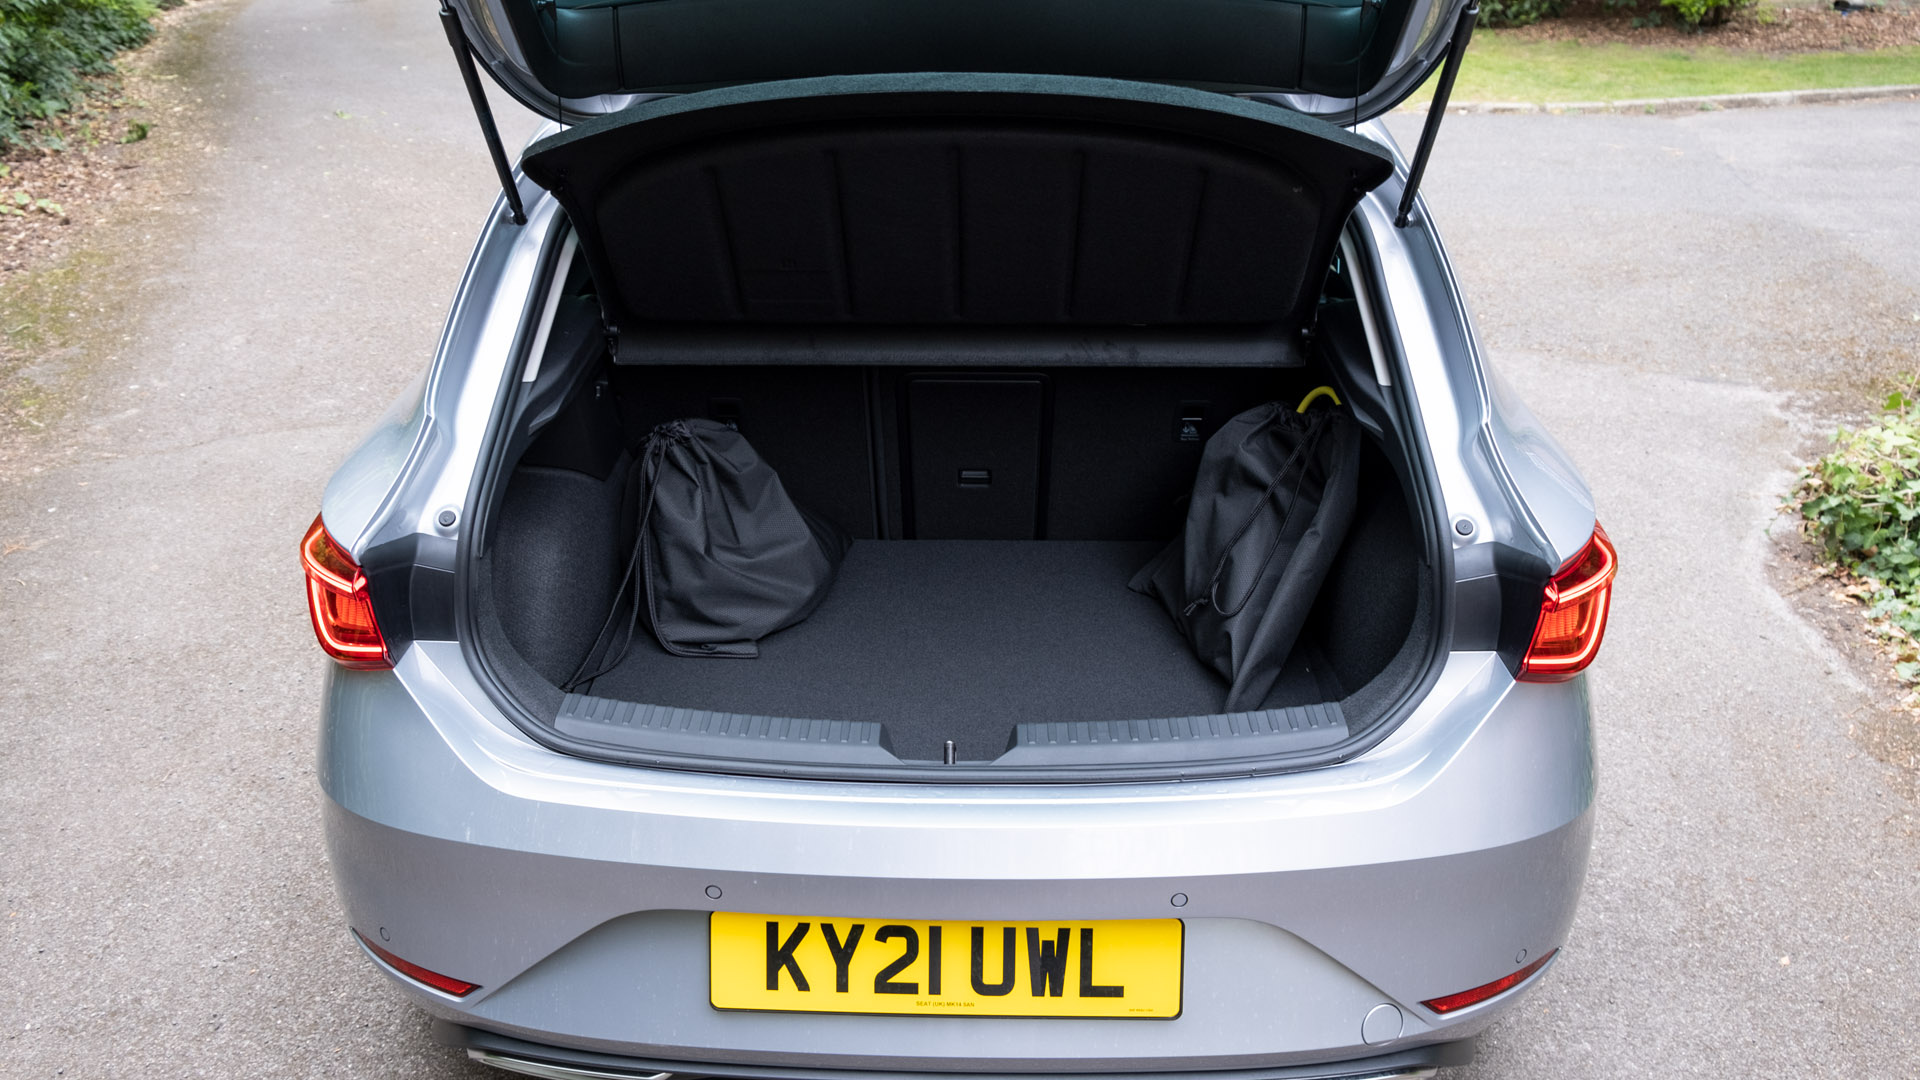 Seat Leon dimensions, boot space and electrification